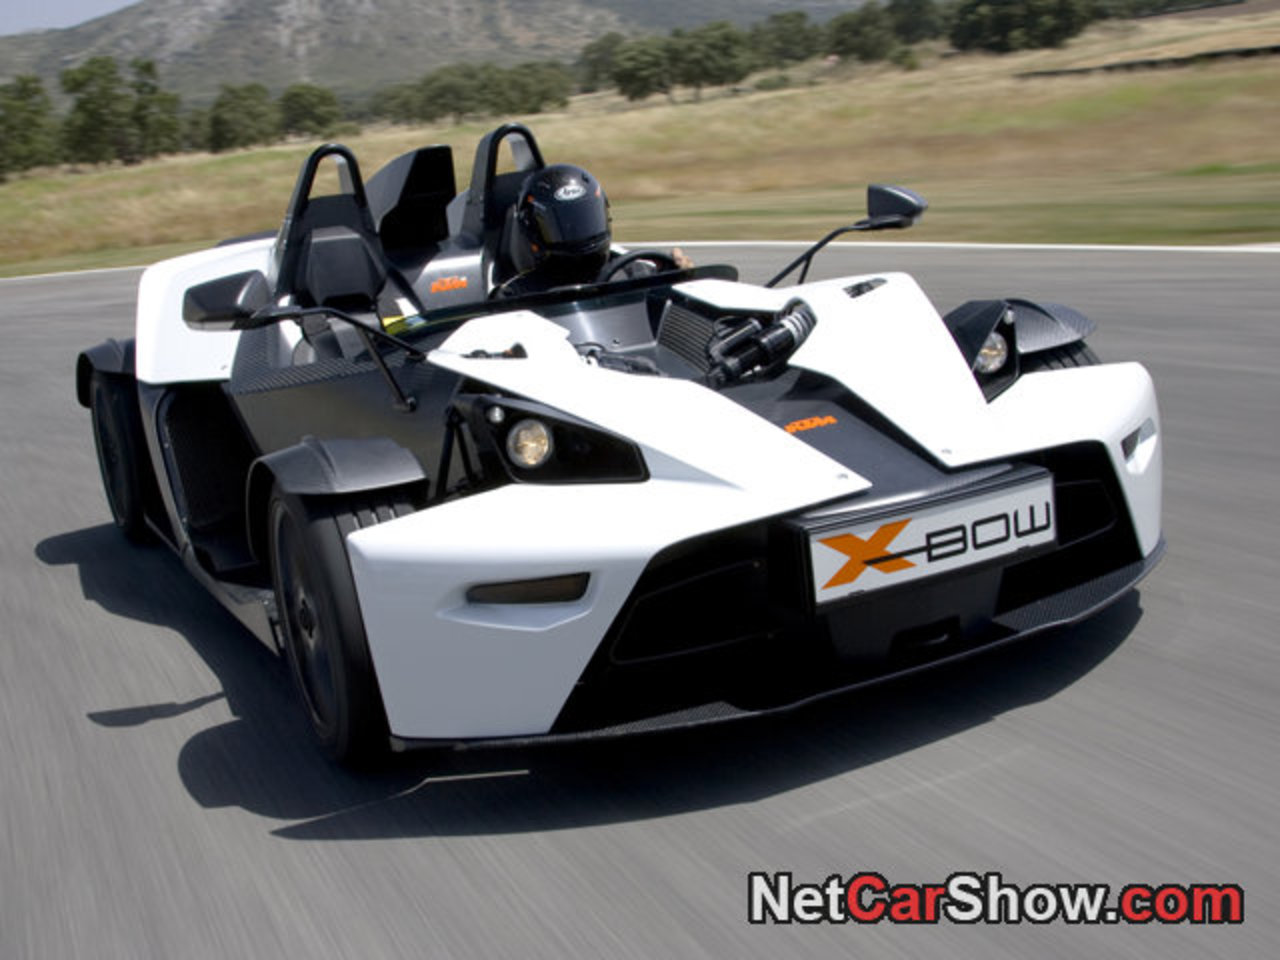 KTM X-Bow picture # 09 of 47, Front Angle, MY 2008, 1280x960